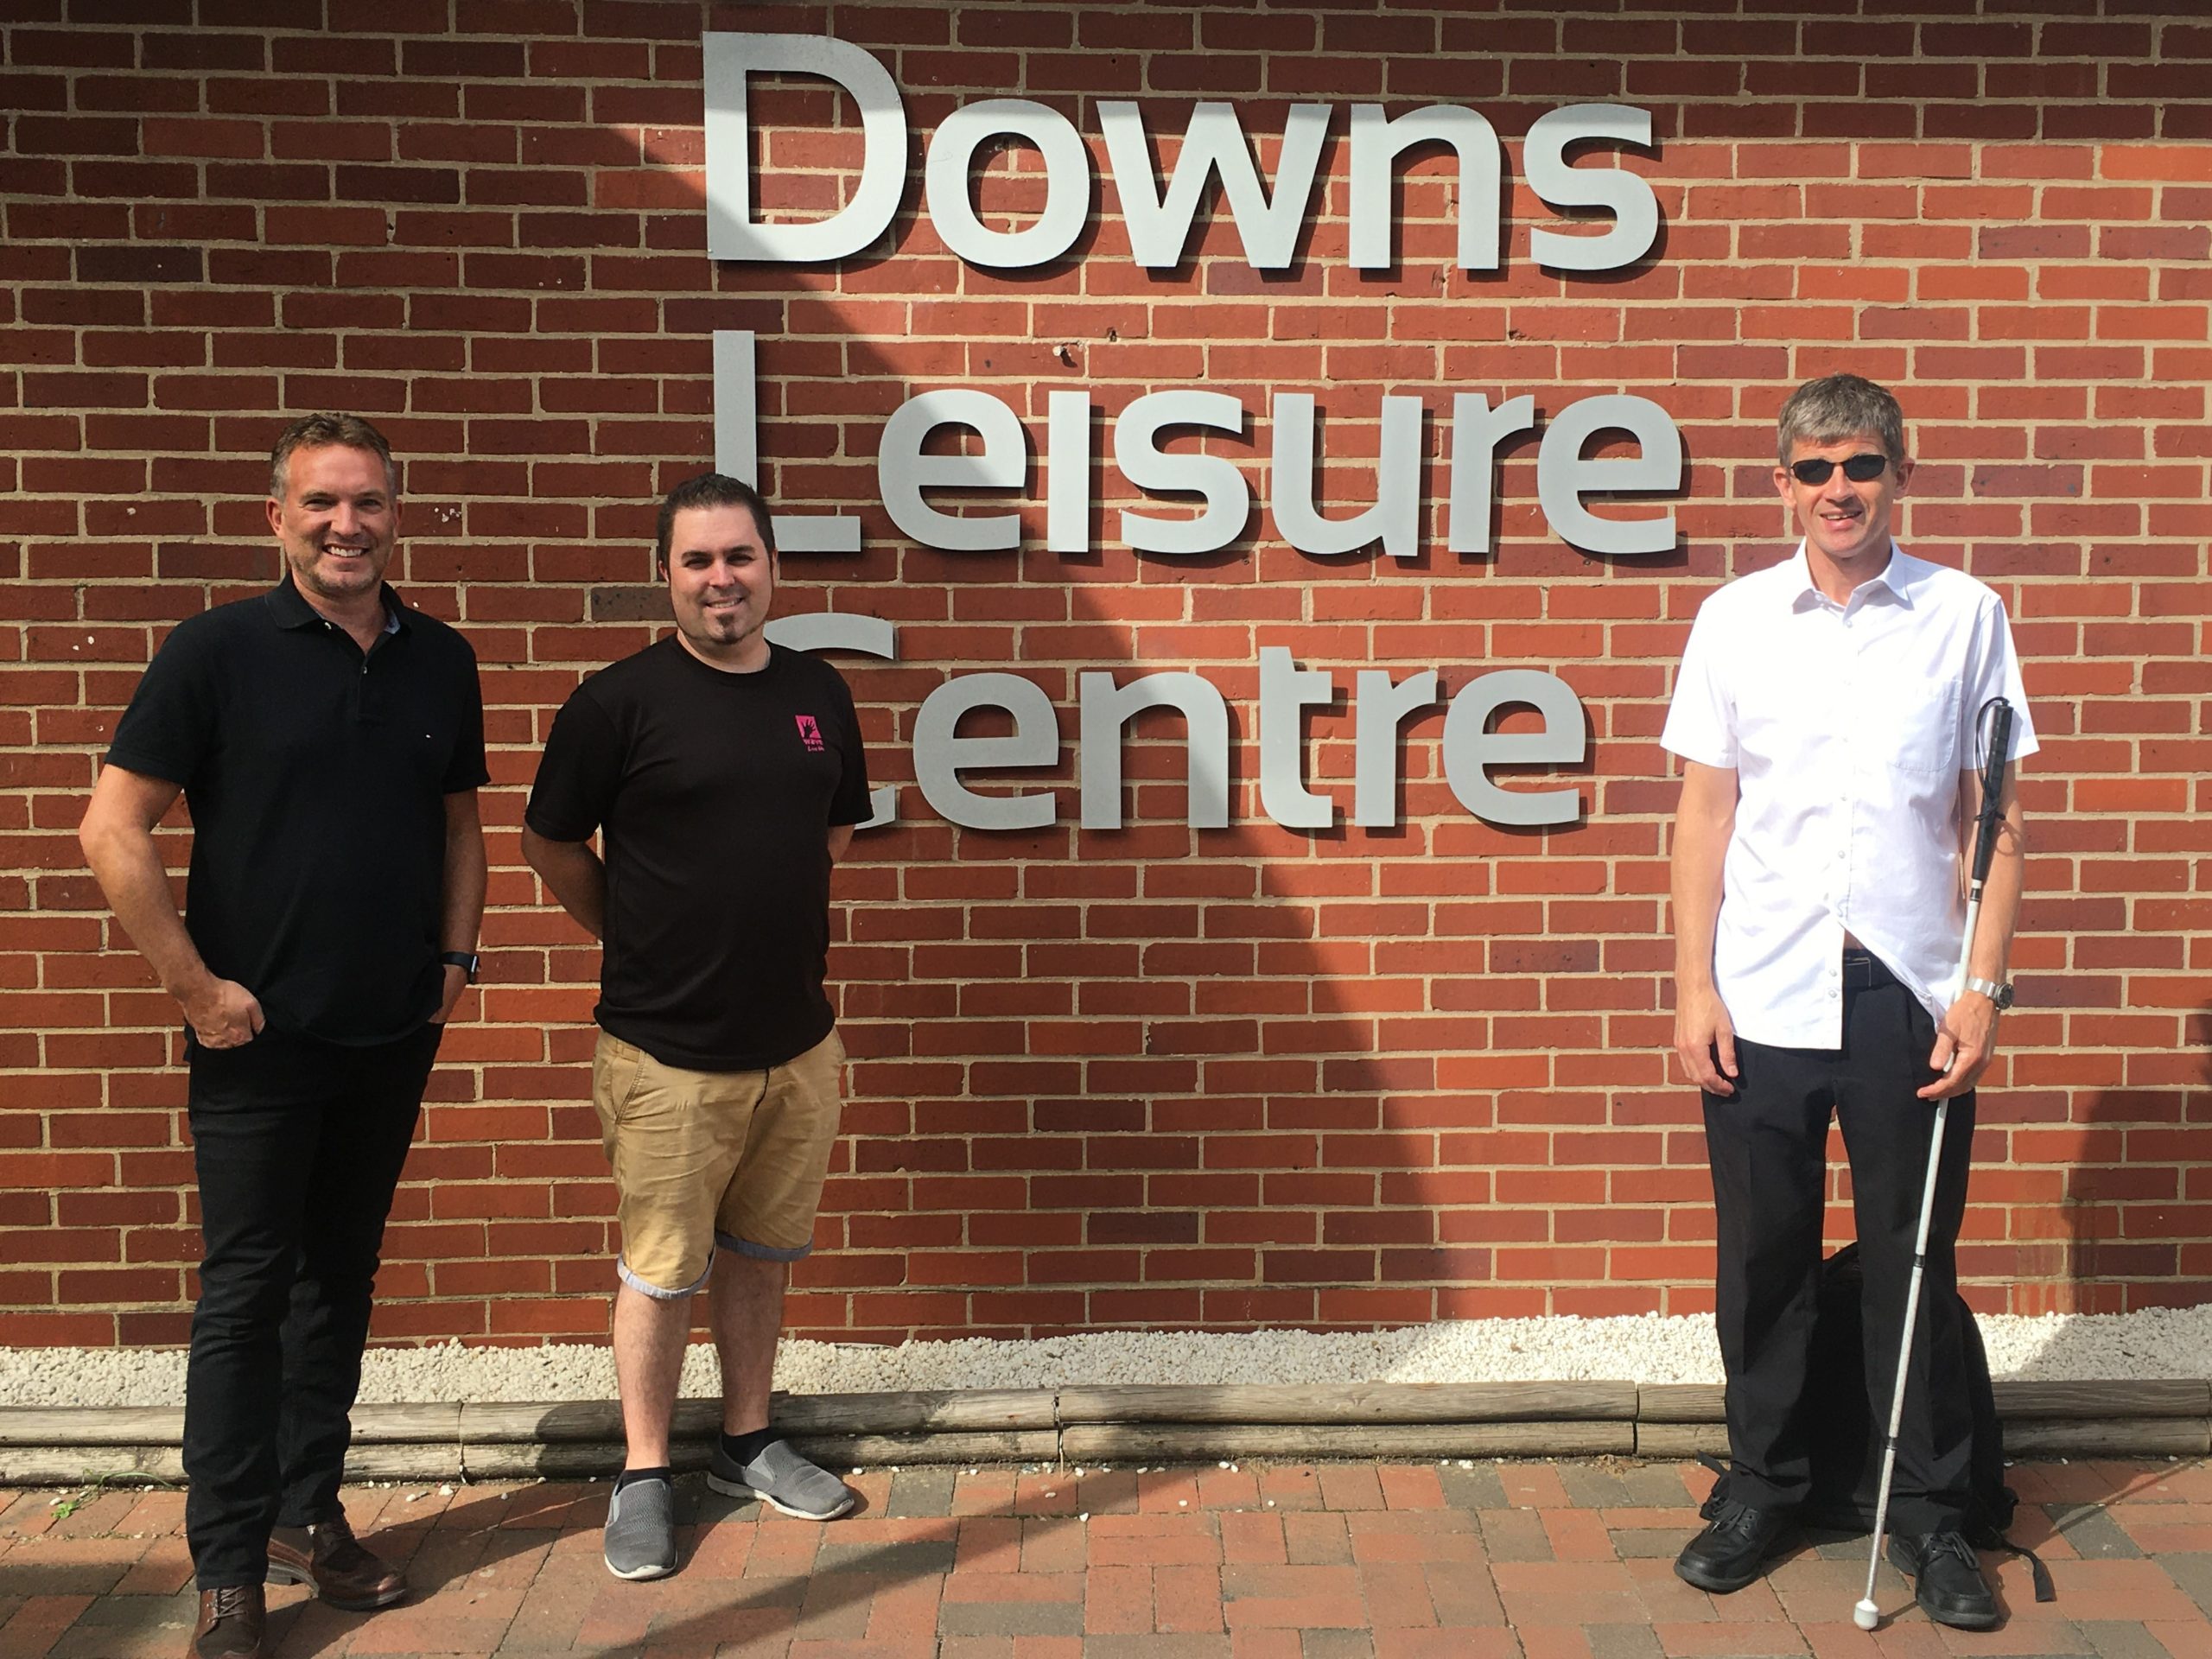 Image shows (left to right): Thomas Pocklington Trust’s Head of Sport and Leisure, Martin Symcox; Wave Leisure Trust’s Training Manager Andrew Grosvenor; and Dave Smith, South East SLC Engagement Manager. They are stood in front of the Downs Leisure Centre.